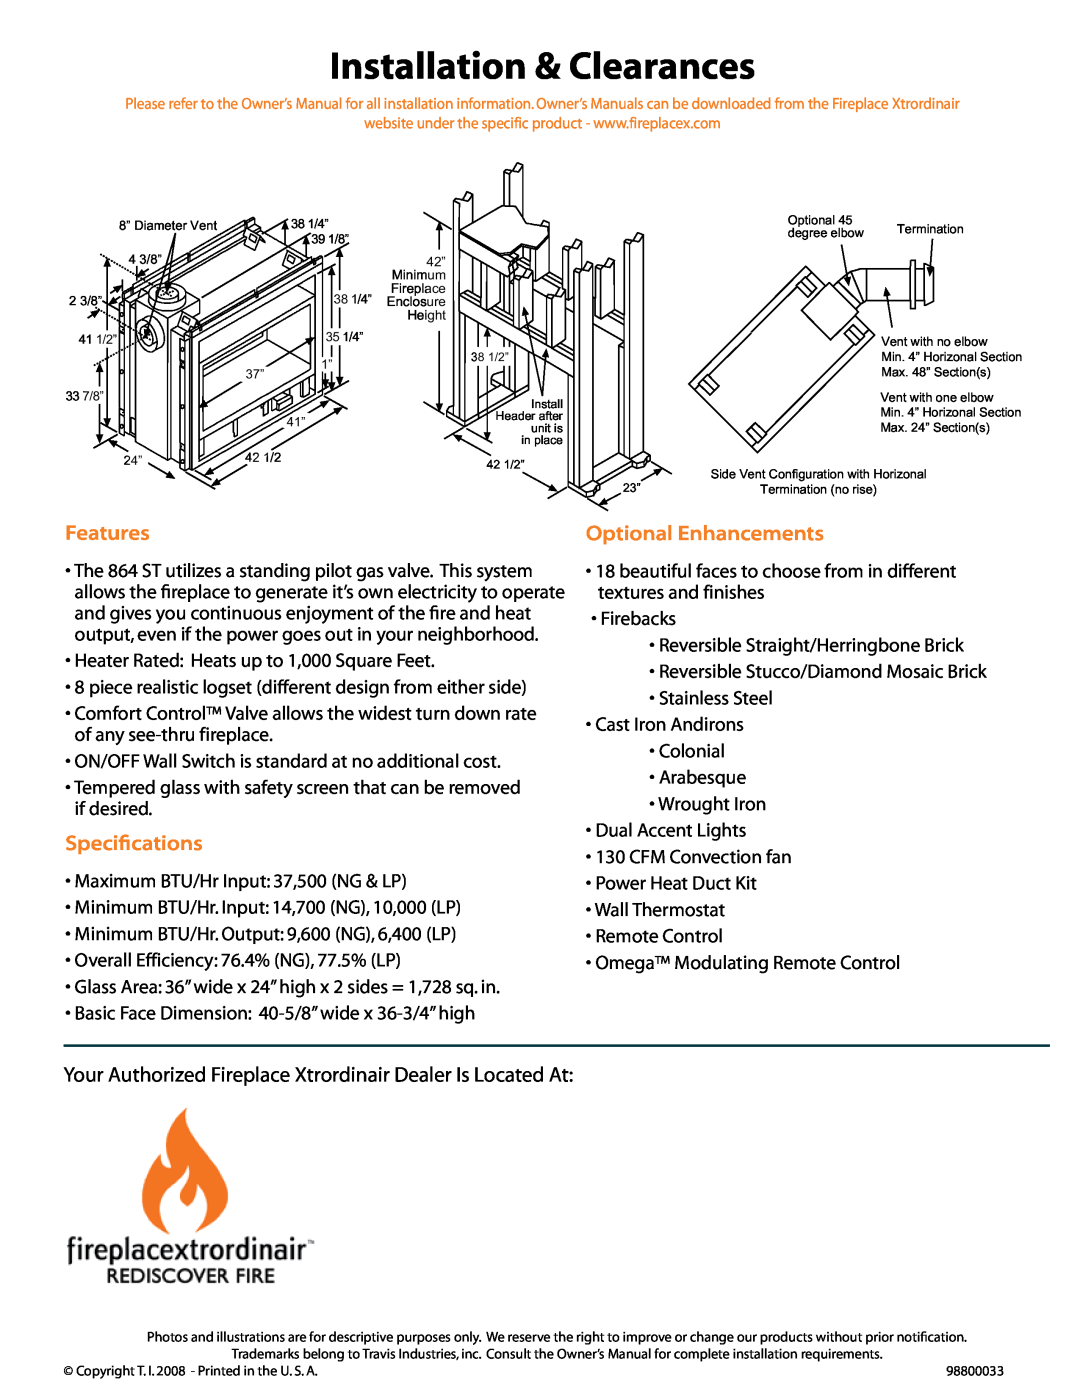 FireplaceXtrordinair 864 See-Thru manual Features, Optional Enhancements, Specif ications, Installation & Clearances 